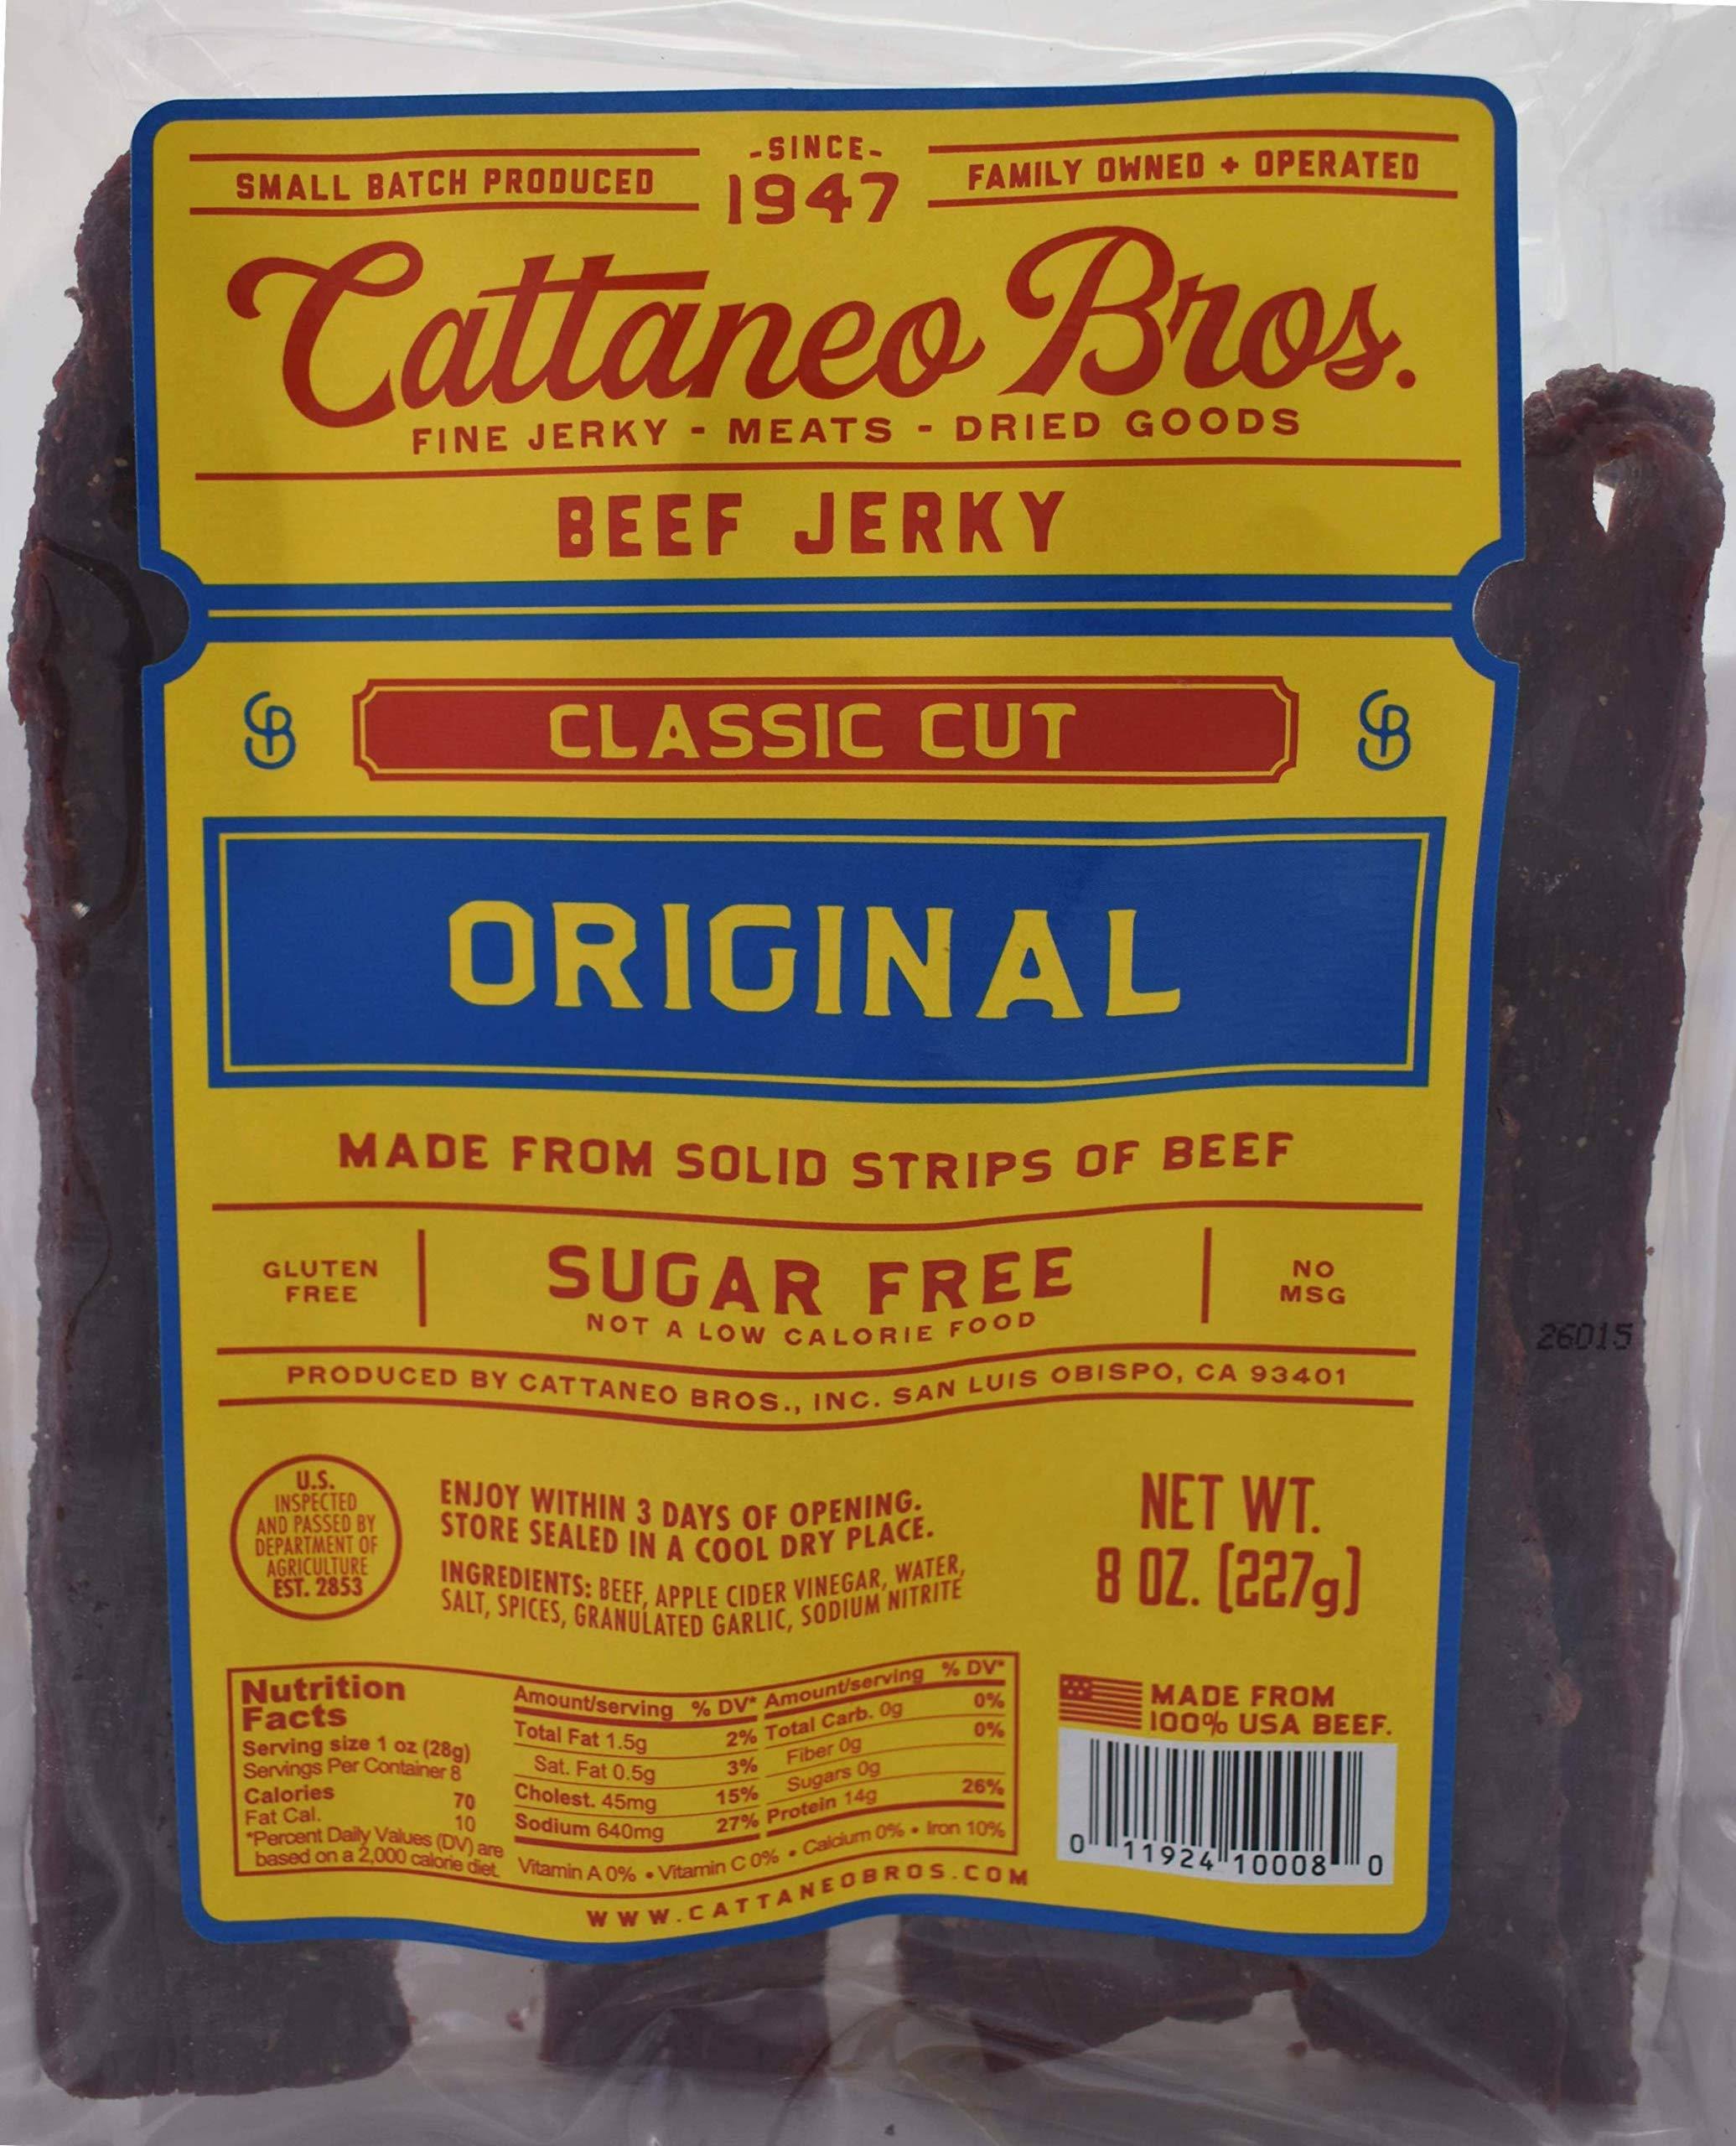 Cattaneo Bros Beef Jerky, Natural Style, Original - 8 oz